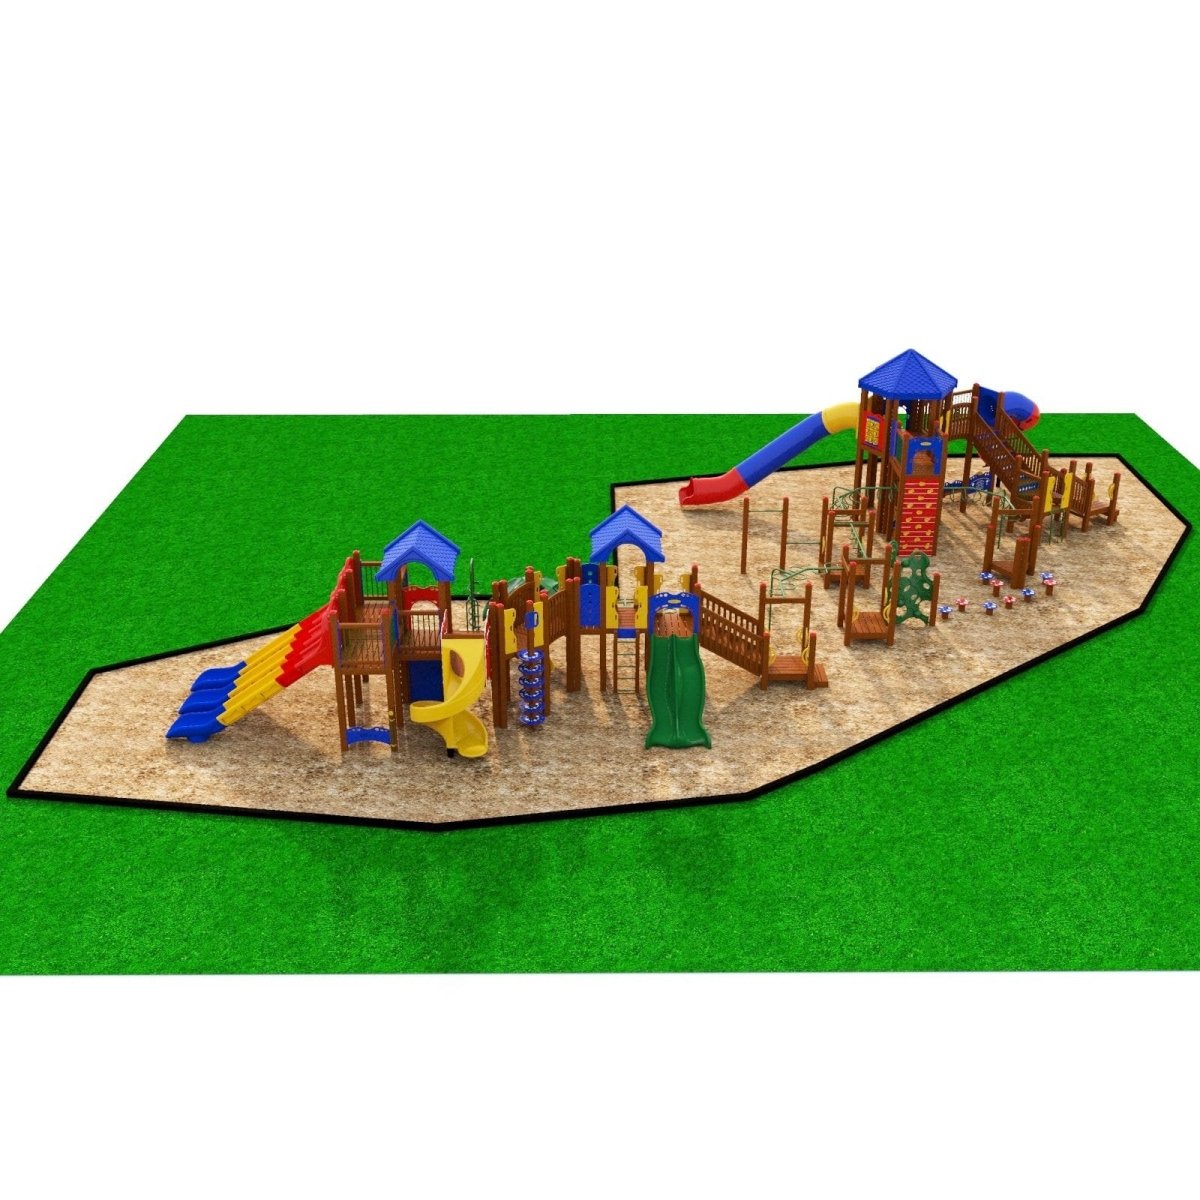 Merry Maker Playset - School-Age Playgrounds - Playtopia, Inc.